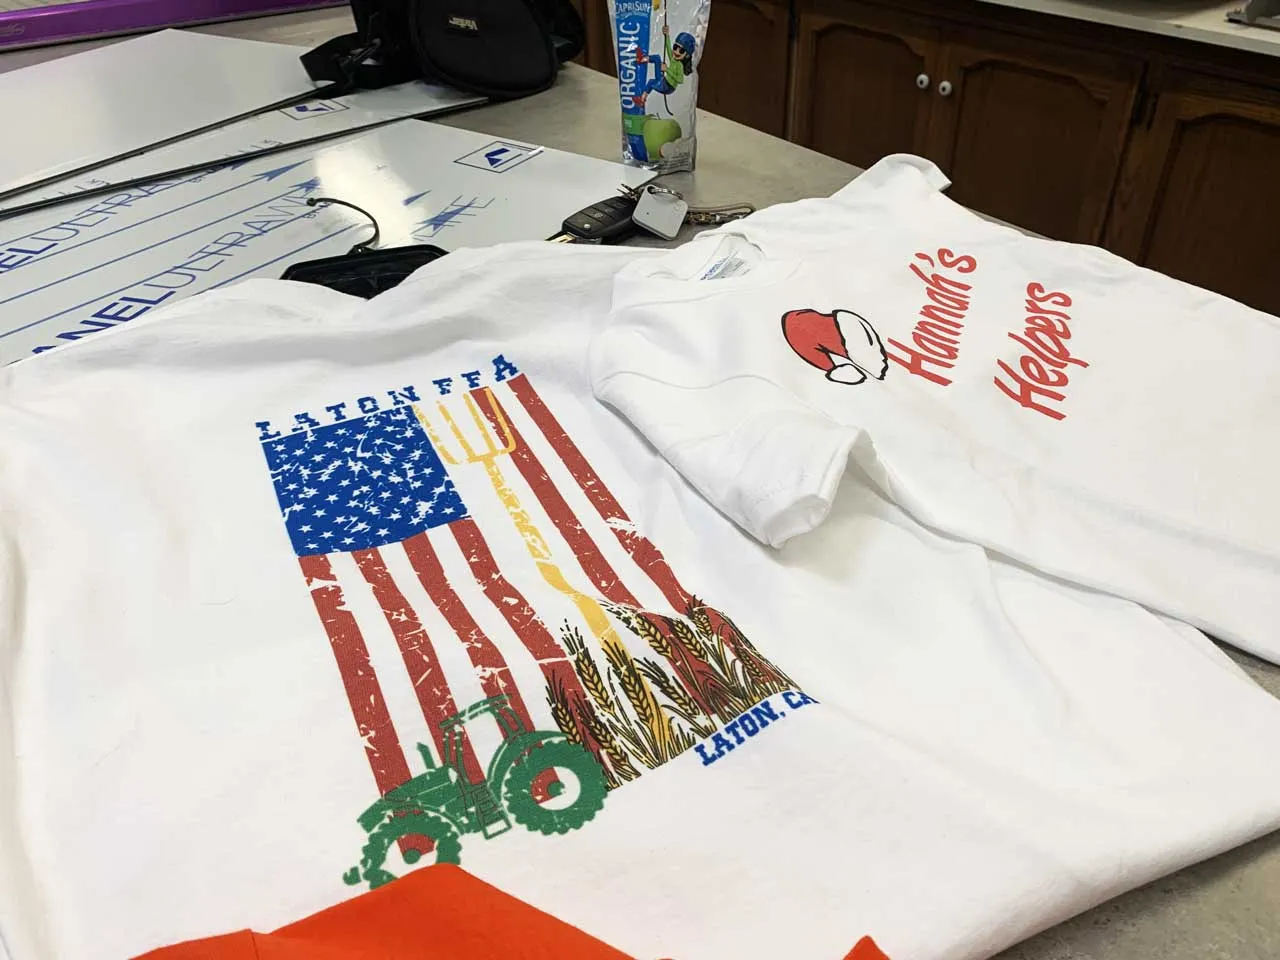 Full Color Printed Shirts near Kings County